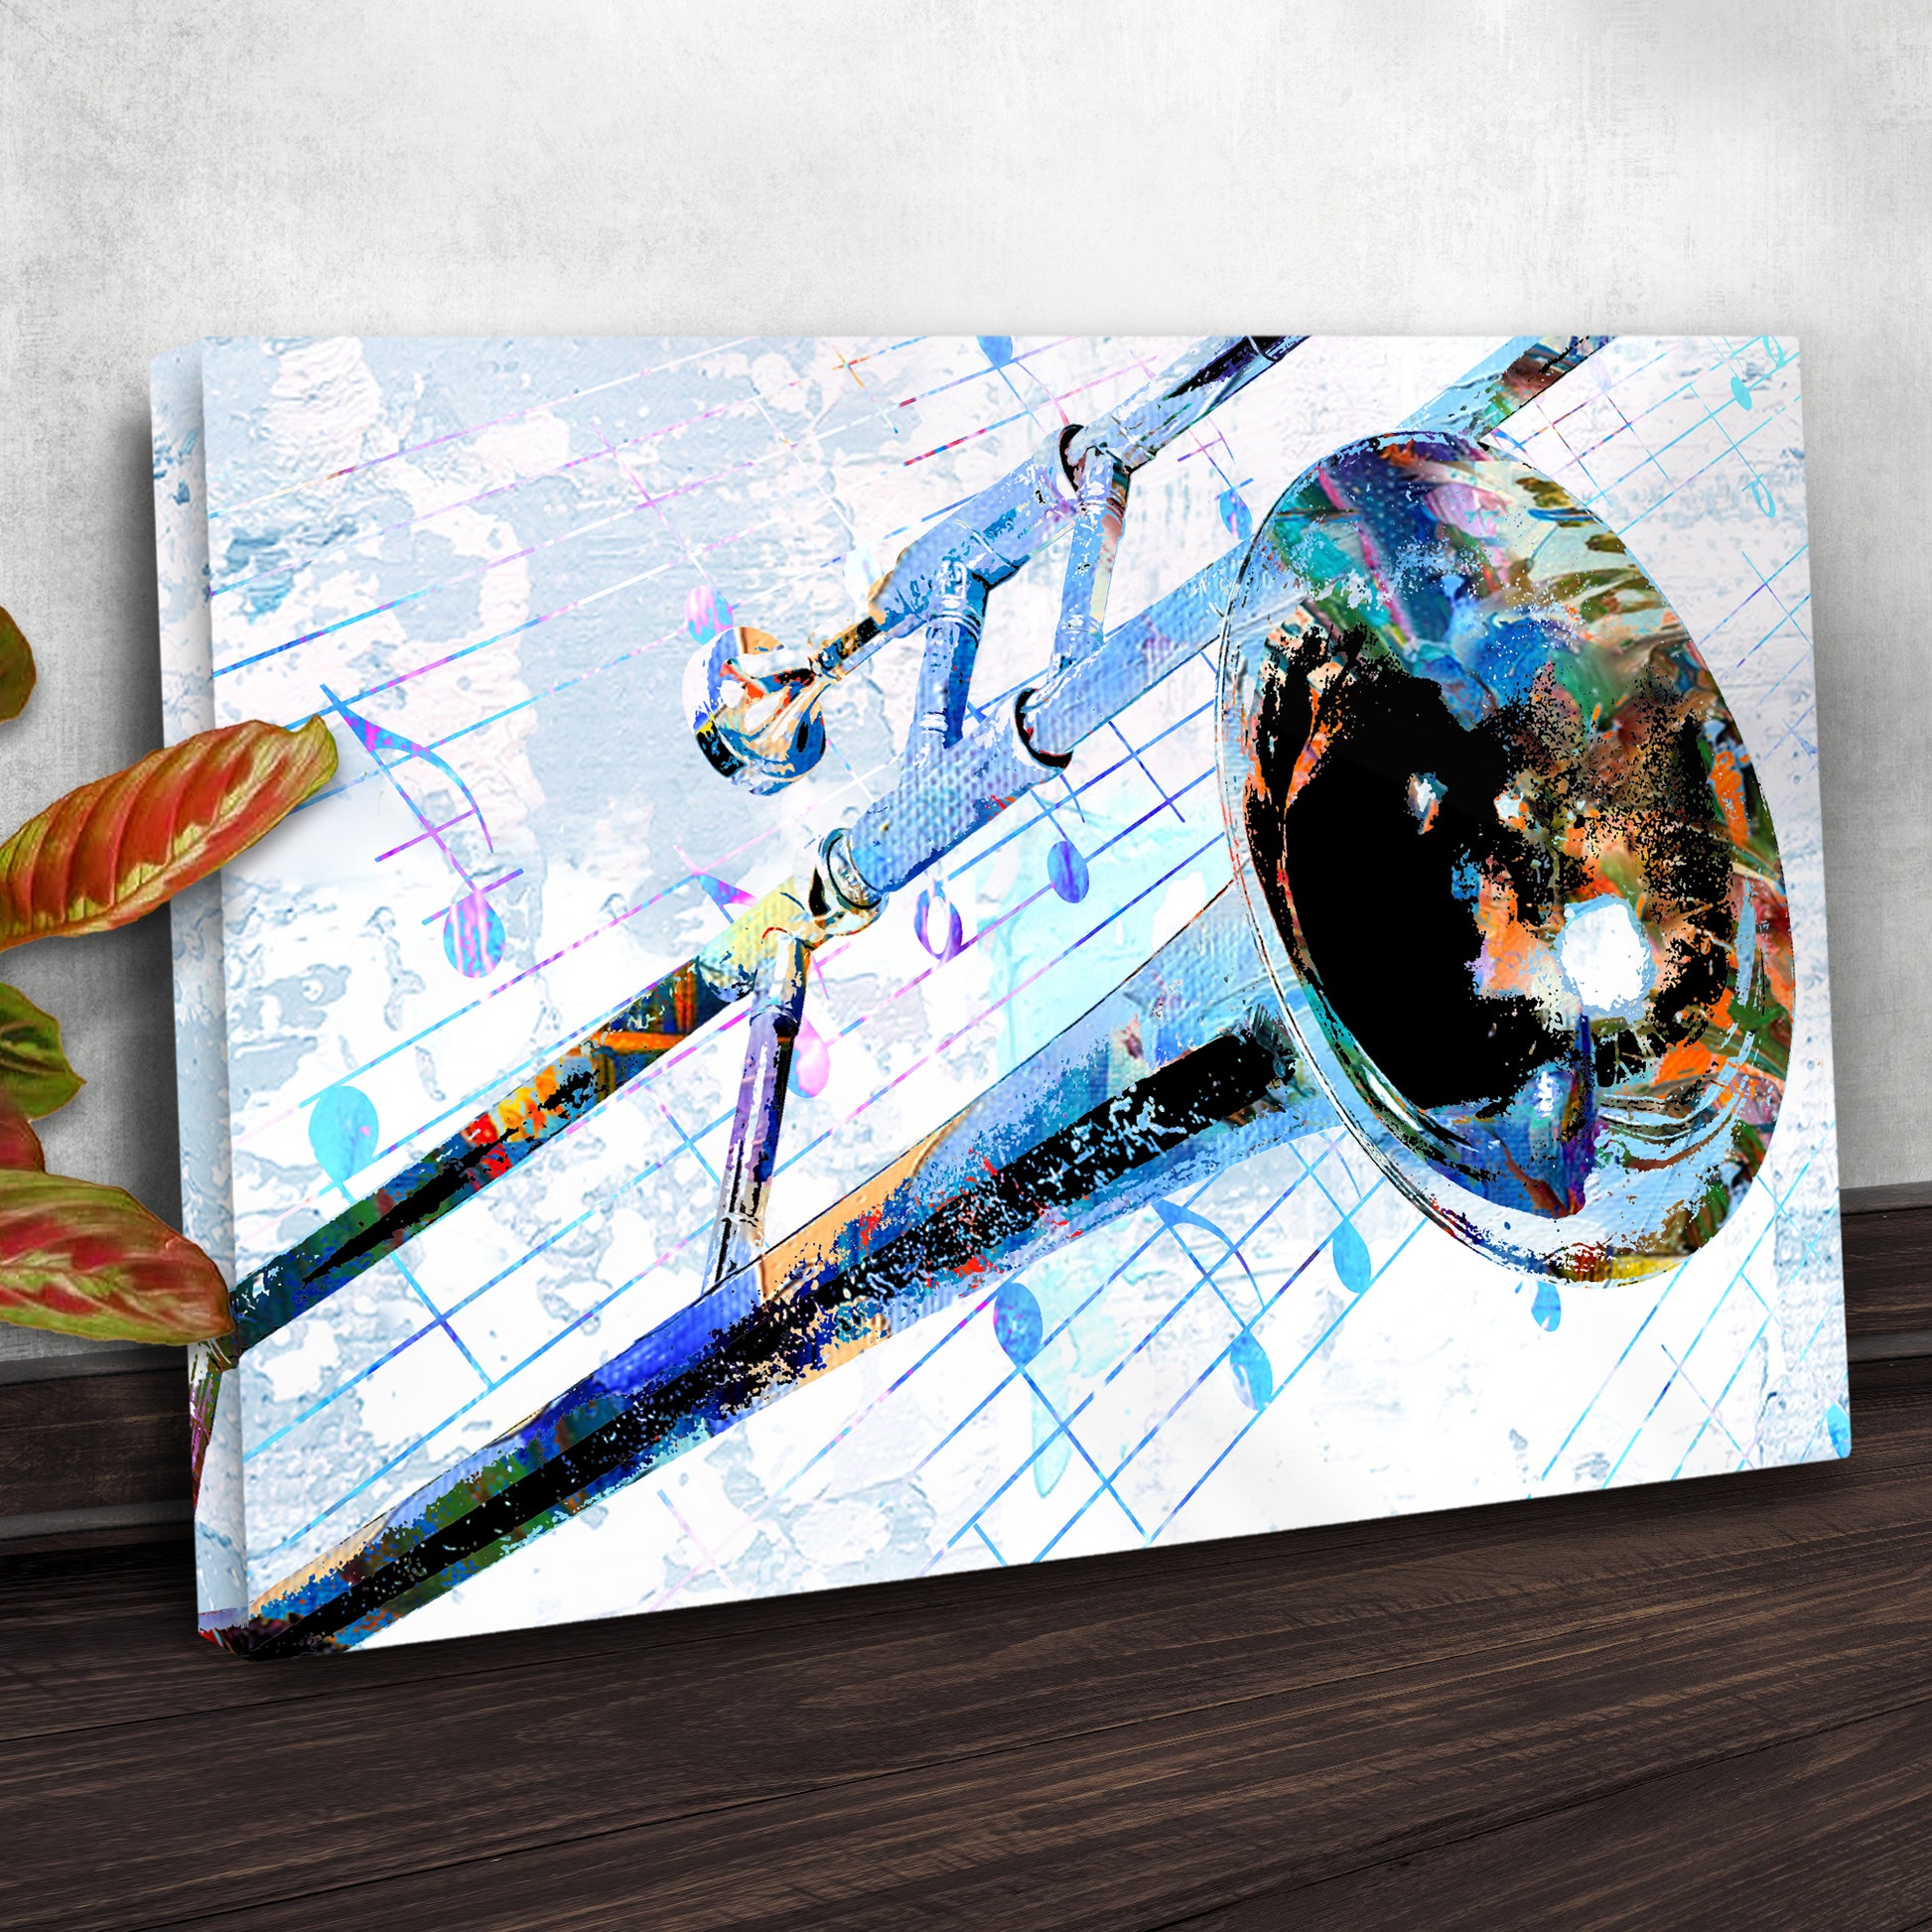 Trombone Abstract Canvas Wall Art - Image by Tailored Canvases